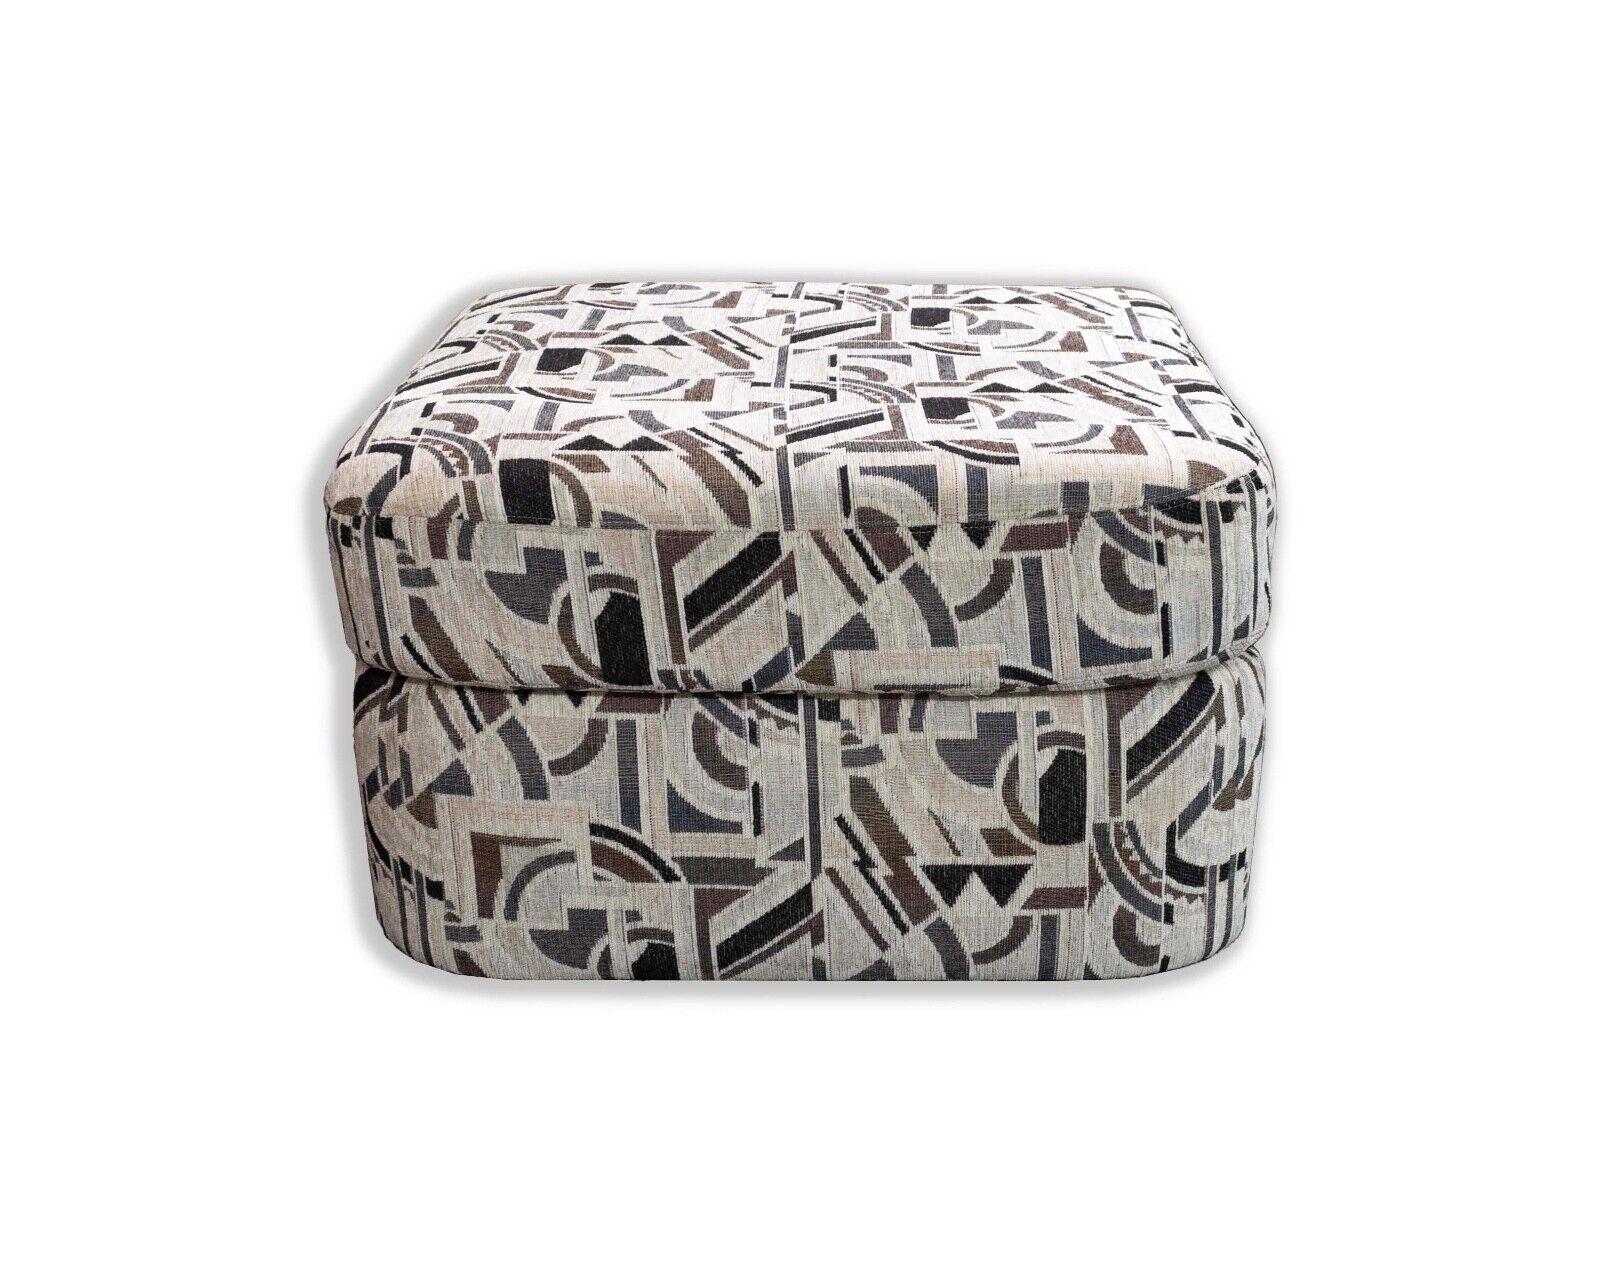 Introducing the Patterned Square Ottoman by Preview Furniture Corporation – a striking addition to contemporary modern interiors. This ottoman seamlessly combines style and functionality with its eye-catching patterned upholstery, bringing a dynamic